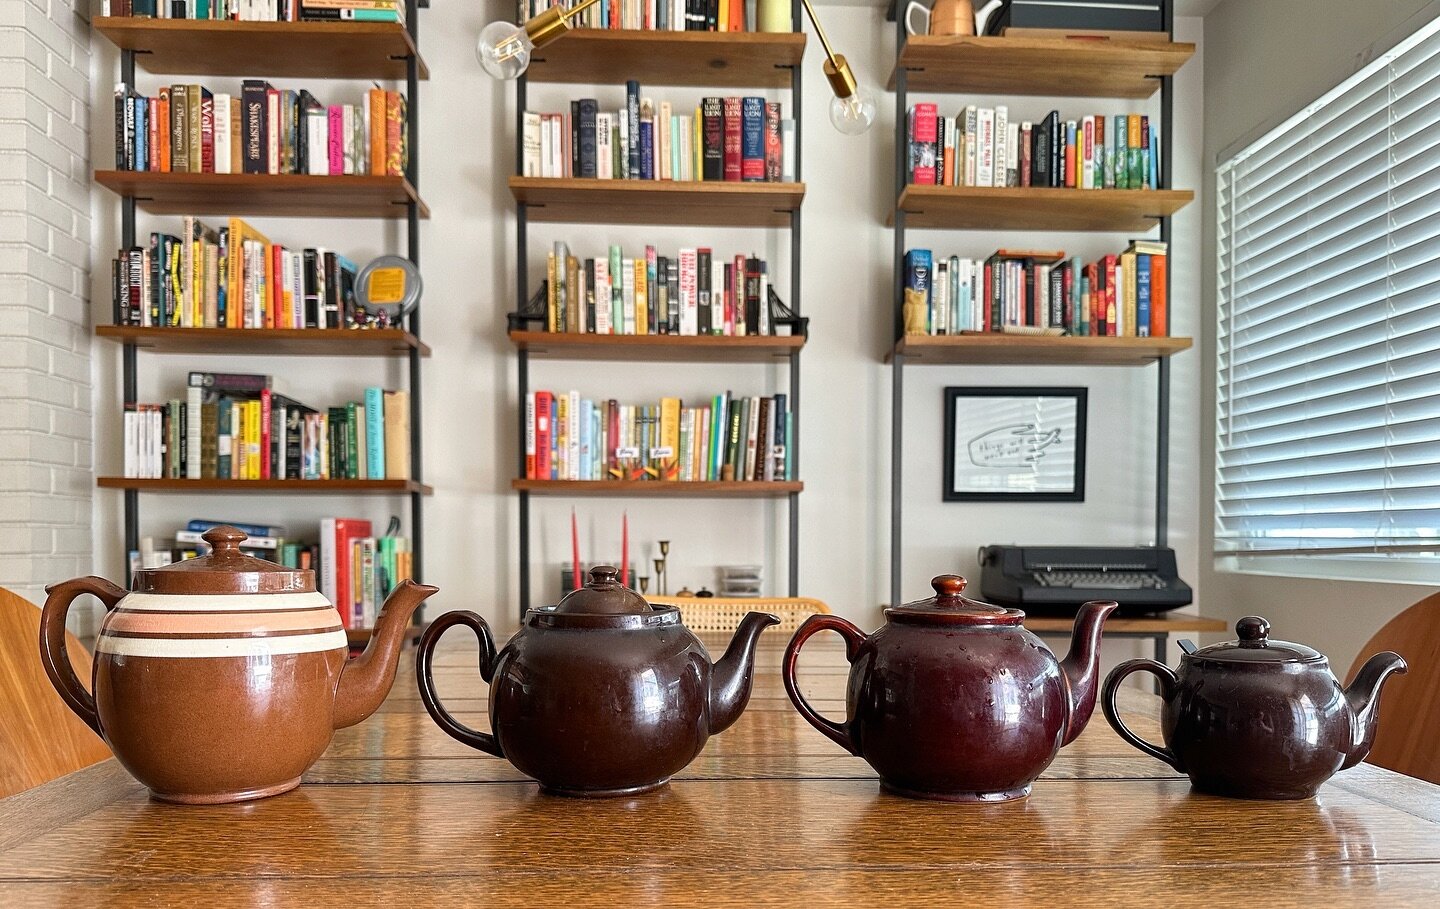 When having very serious teapot discussions with a girlfriend, it&rsquo;s only natural to line up all the teapots and photograph them, so you have a visual reference to the wonder that is the Brown Betty. They look like they want to do a bit of a dan